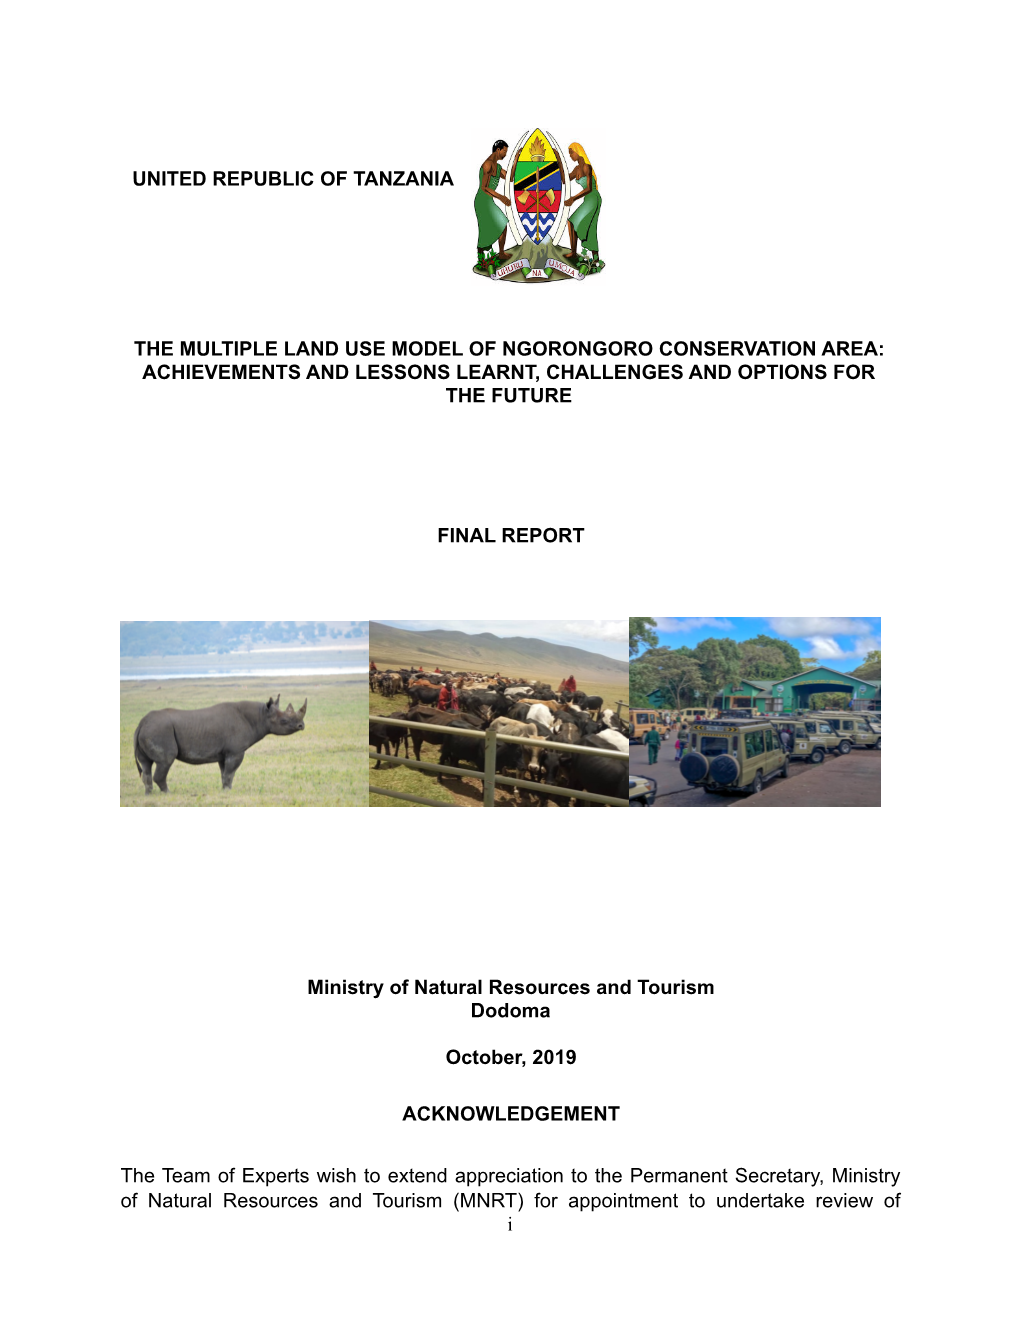 The Multiple Land Use Model of Ngorongoro Conservation Area: Achievements and Lessons Learnt, Challenges and Options for the Future